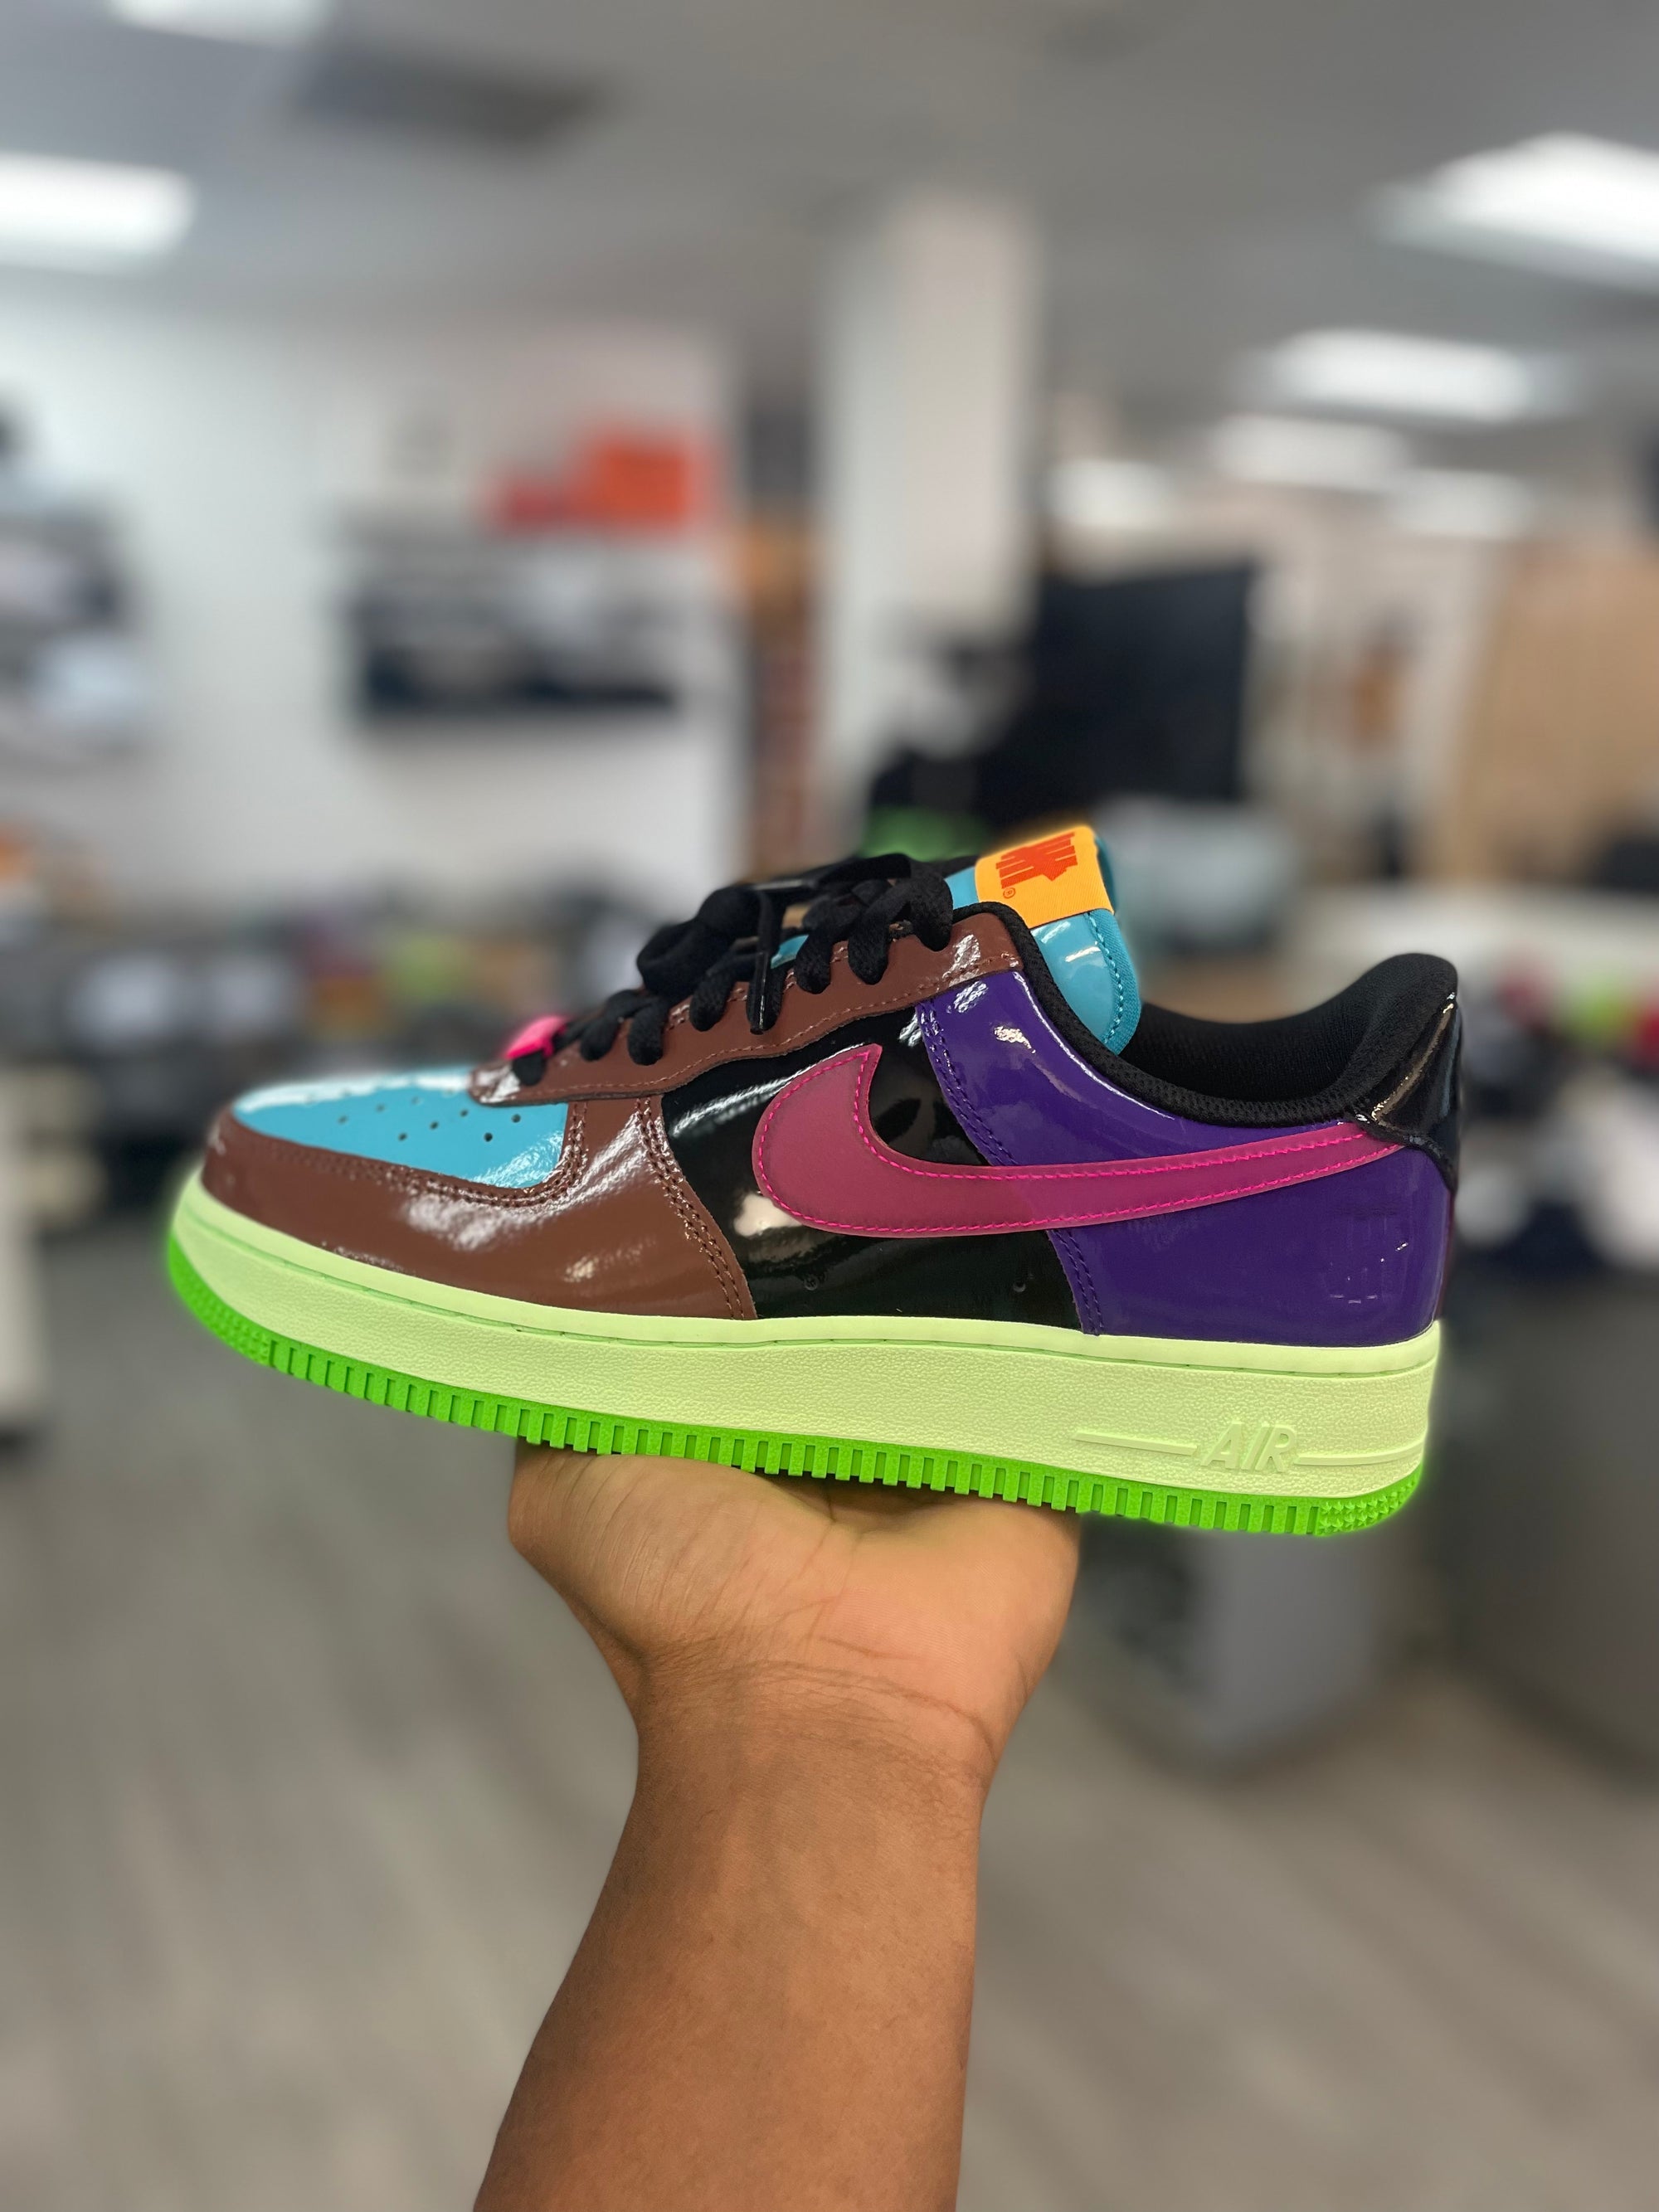 Luftfart Lam spand Nike Air Force 1 Low SP Multicolor Patent Pink Prime - Luxuries By Luck